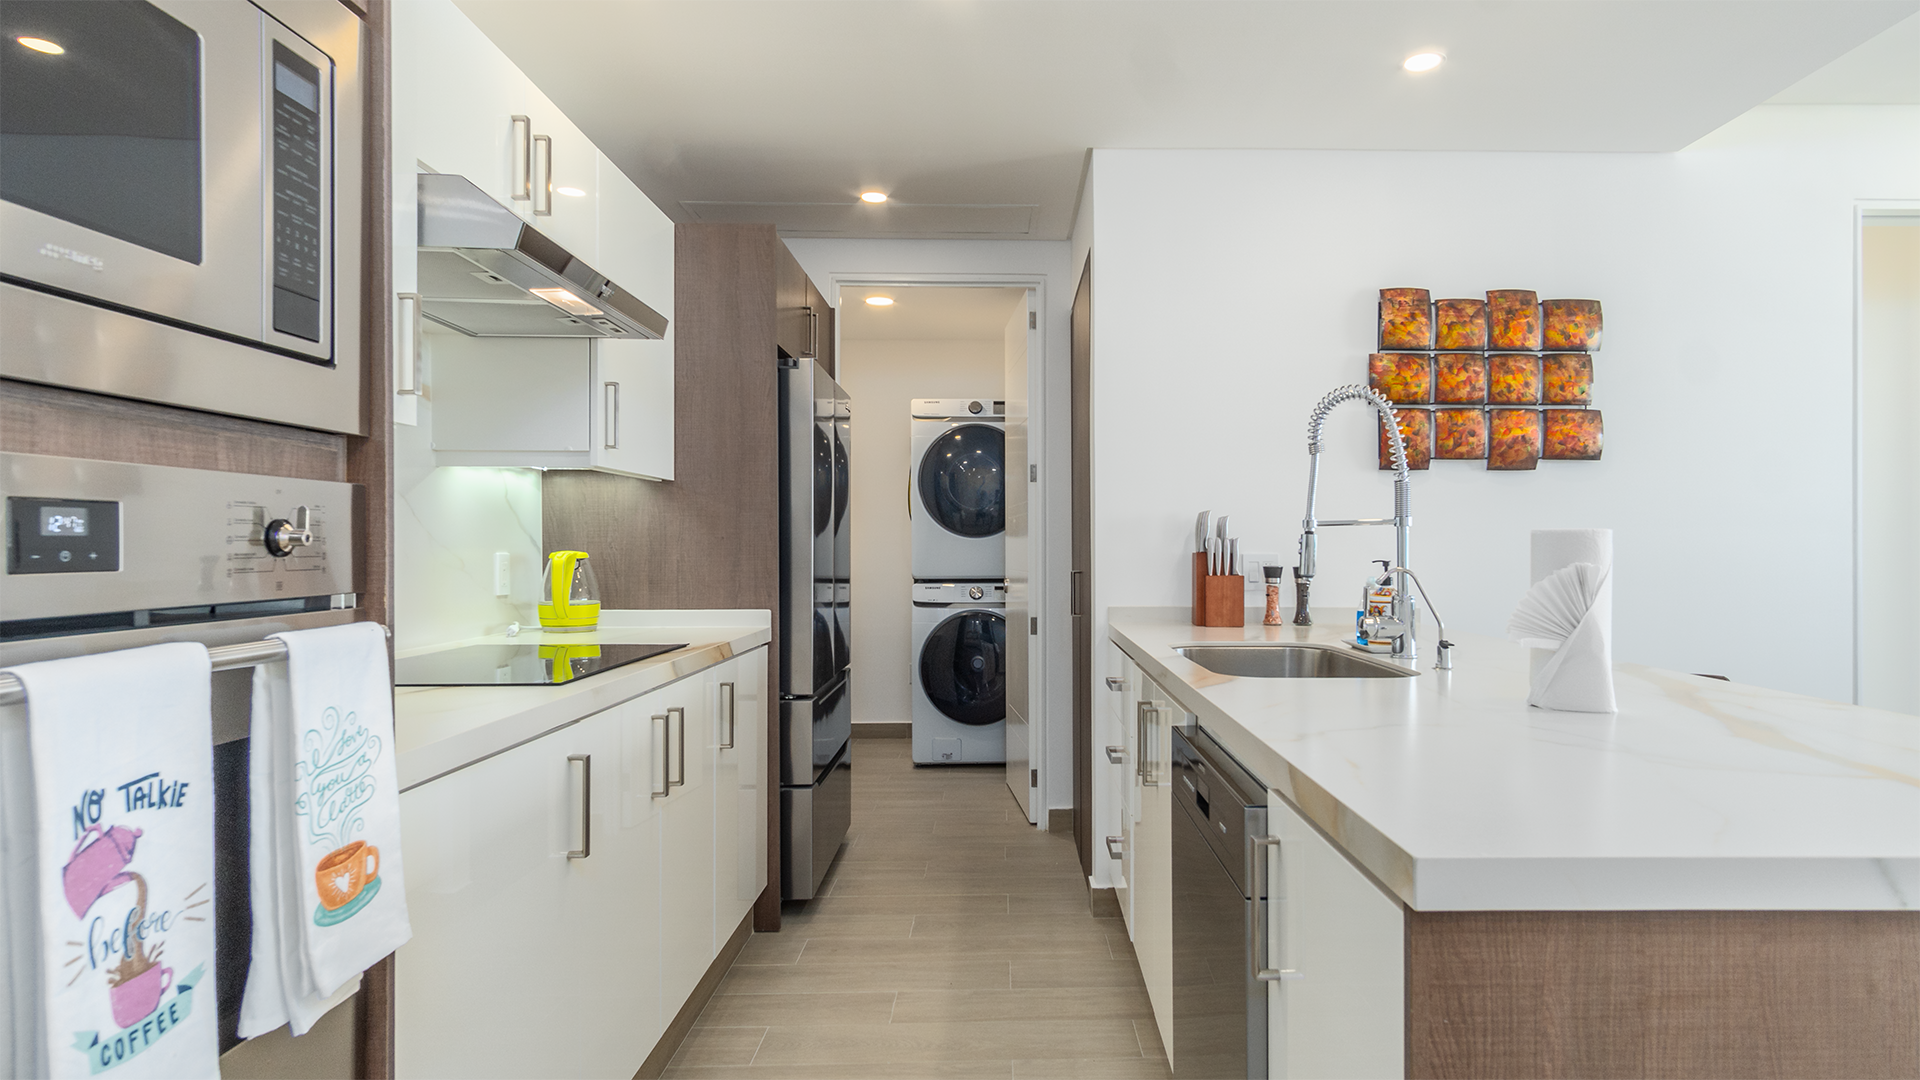 pass through the kitchen to the utility room and its sink, washer, and dryer